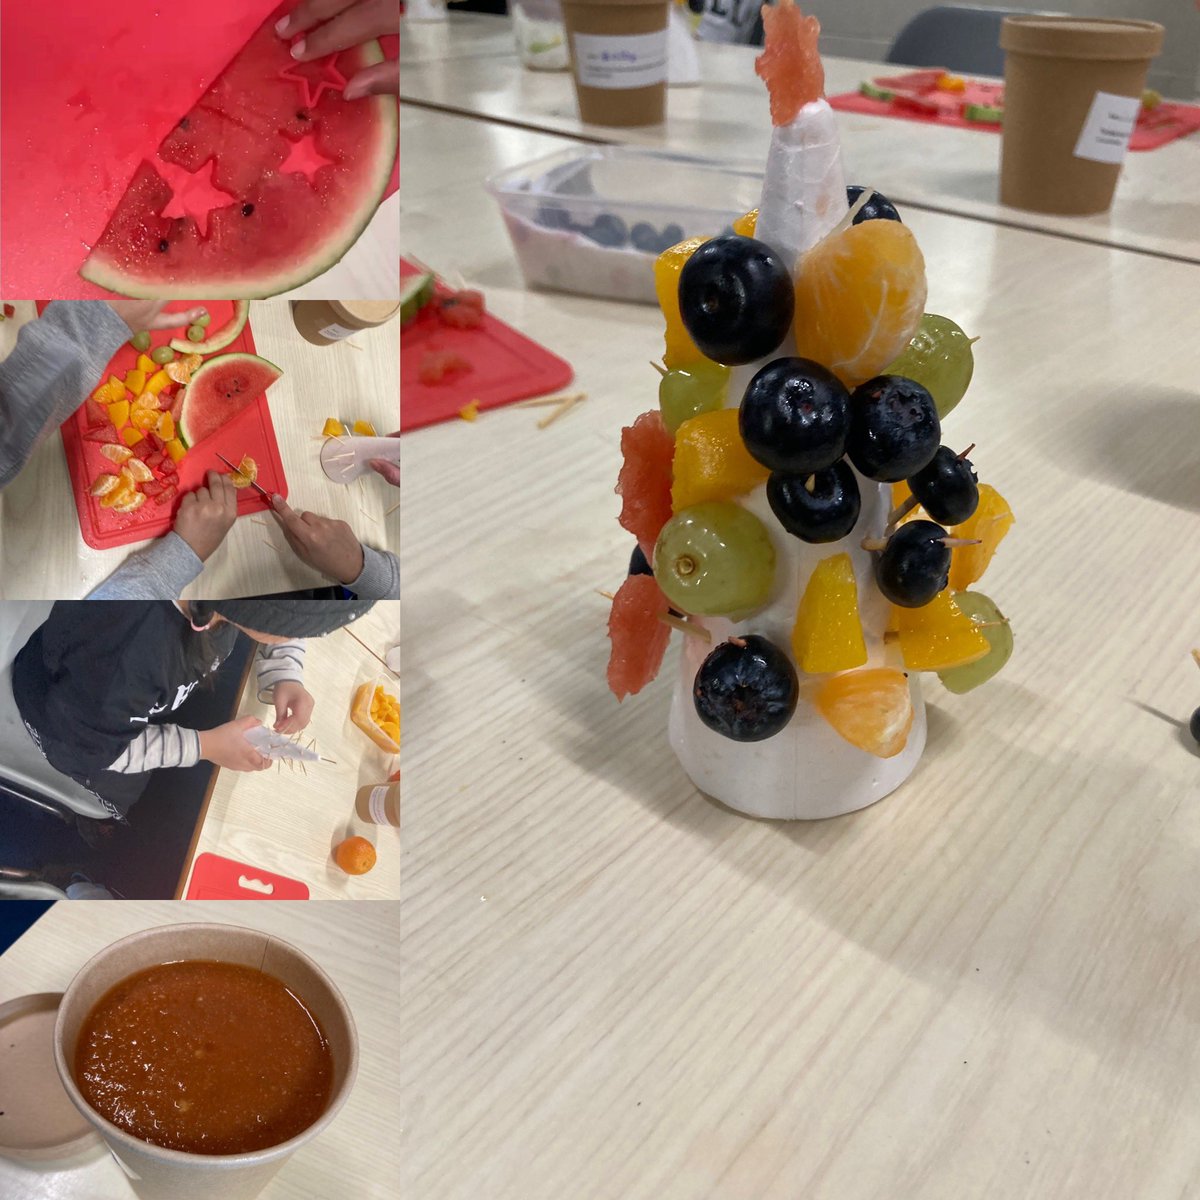 What a fun morning at Brooksbank Xmas Camp making delicious tomato and lentil soup and fruity Xmas trees to support the Strive for 5! message. Lots of creativity going on!! @HAFCalderdale @phunkyfoods #HAF2022 #healthyholidayscalderdale